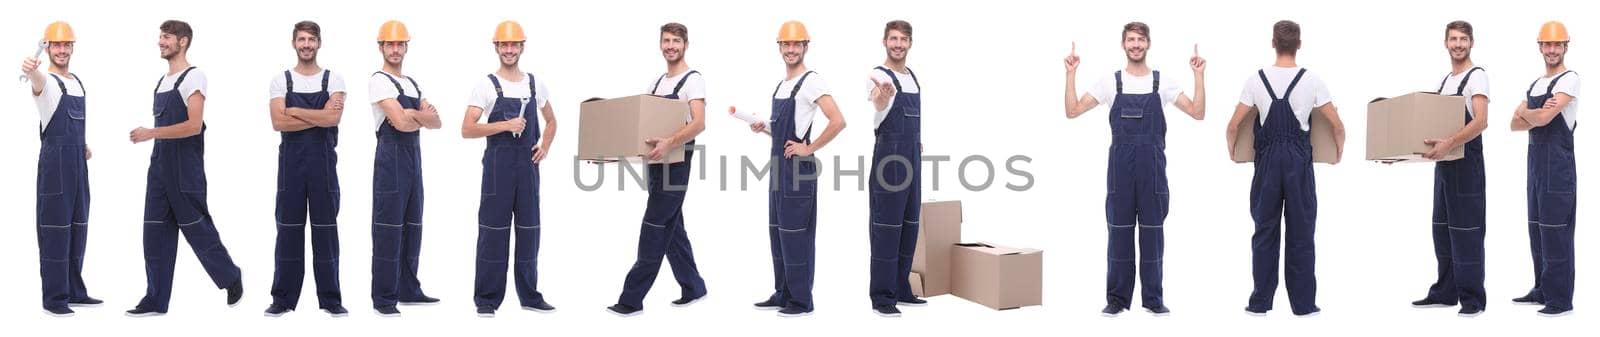 panoramic collage of skilled handyman isolated on white background.